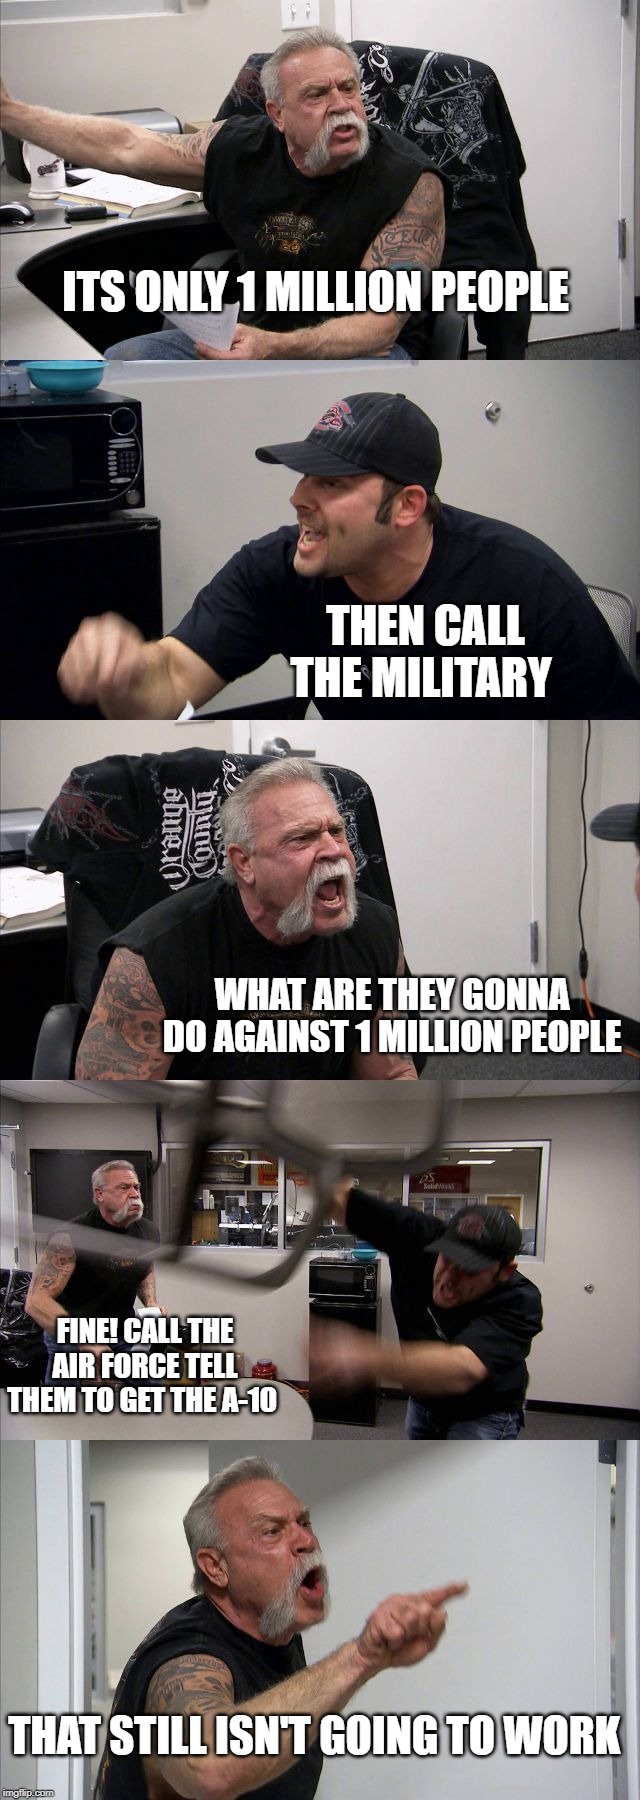 American Chopper Argument | ITS ONLY 1 MILLION PEOPLE; THEN CALL THE MILITARY; WHAT ARE THEY GONNA DO AGAINST 1 MILLION PEOPLE; FINE! CALL THE AIR FORCE TELL THEM TO GET THE A-10; THAT STILL ISN'T GOING TO WORK | image tagged in memes,american chopper argument | made w/ Imgflip meme maker